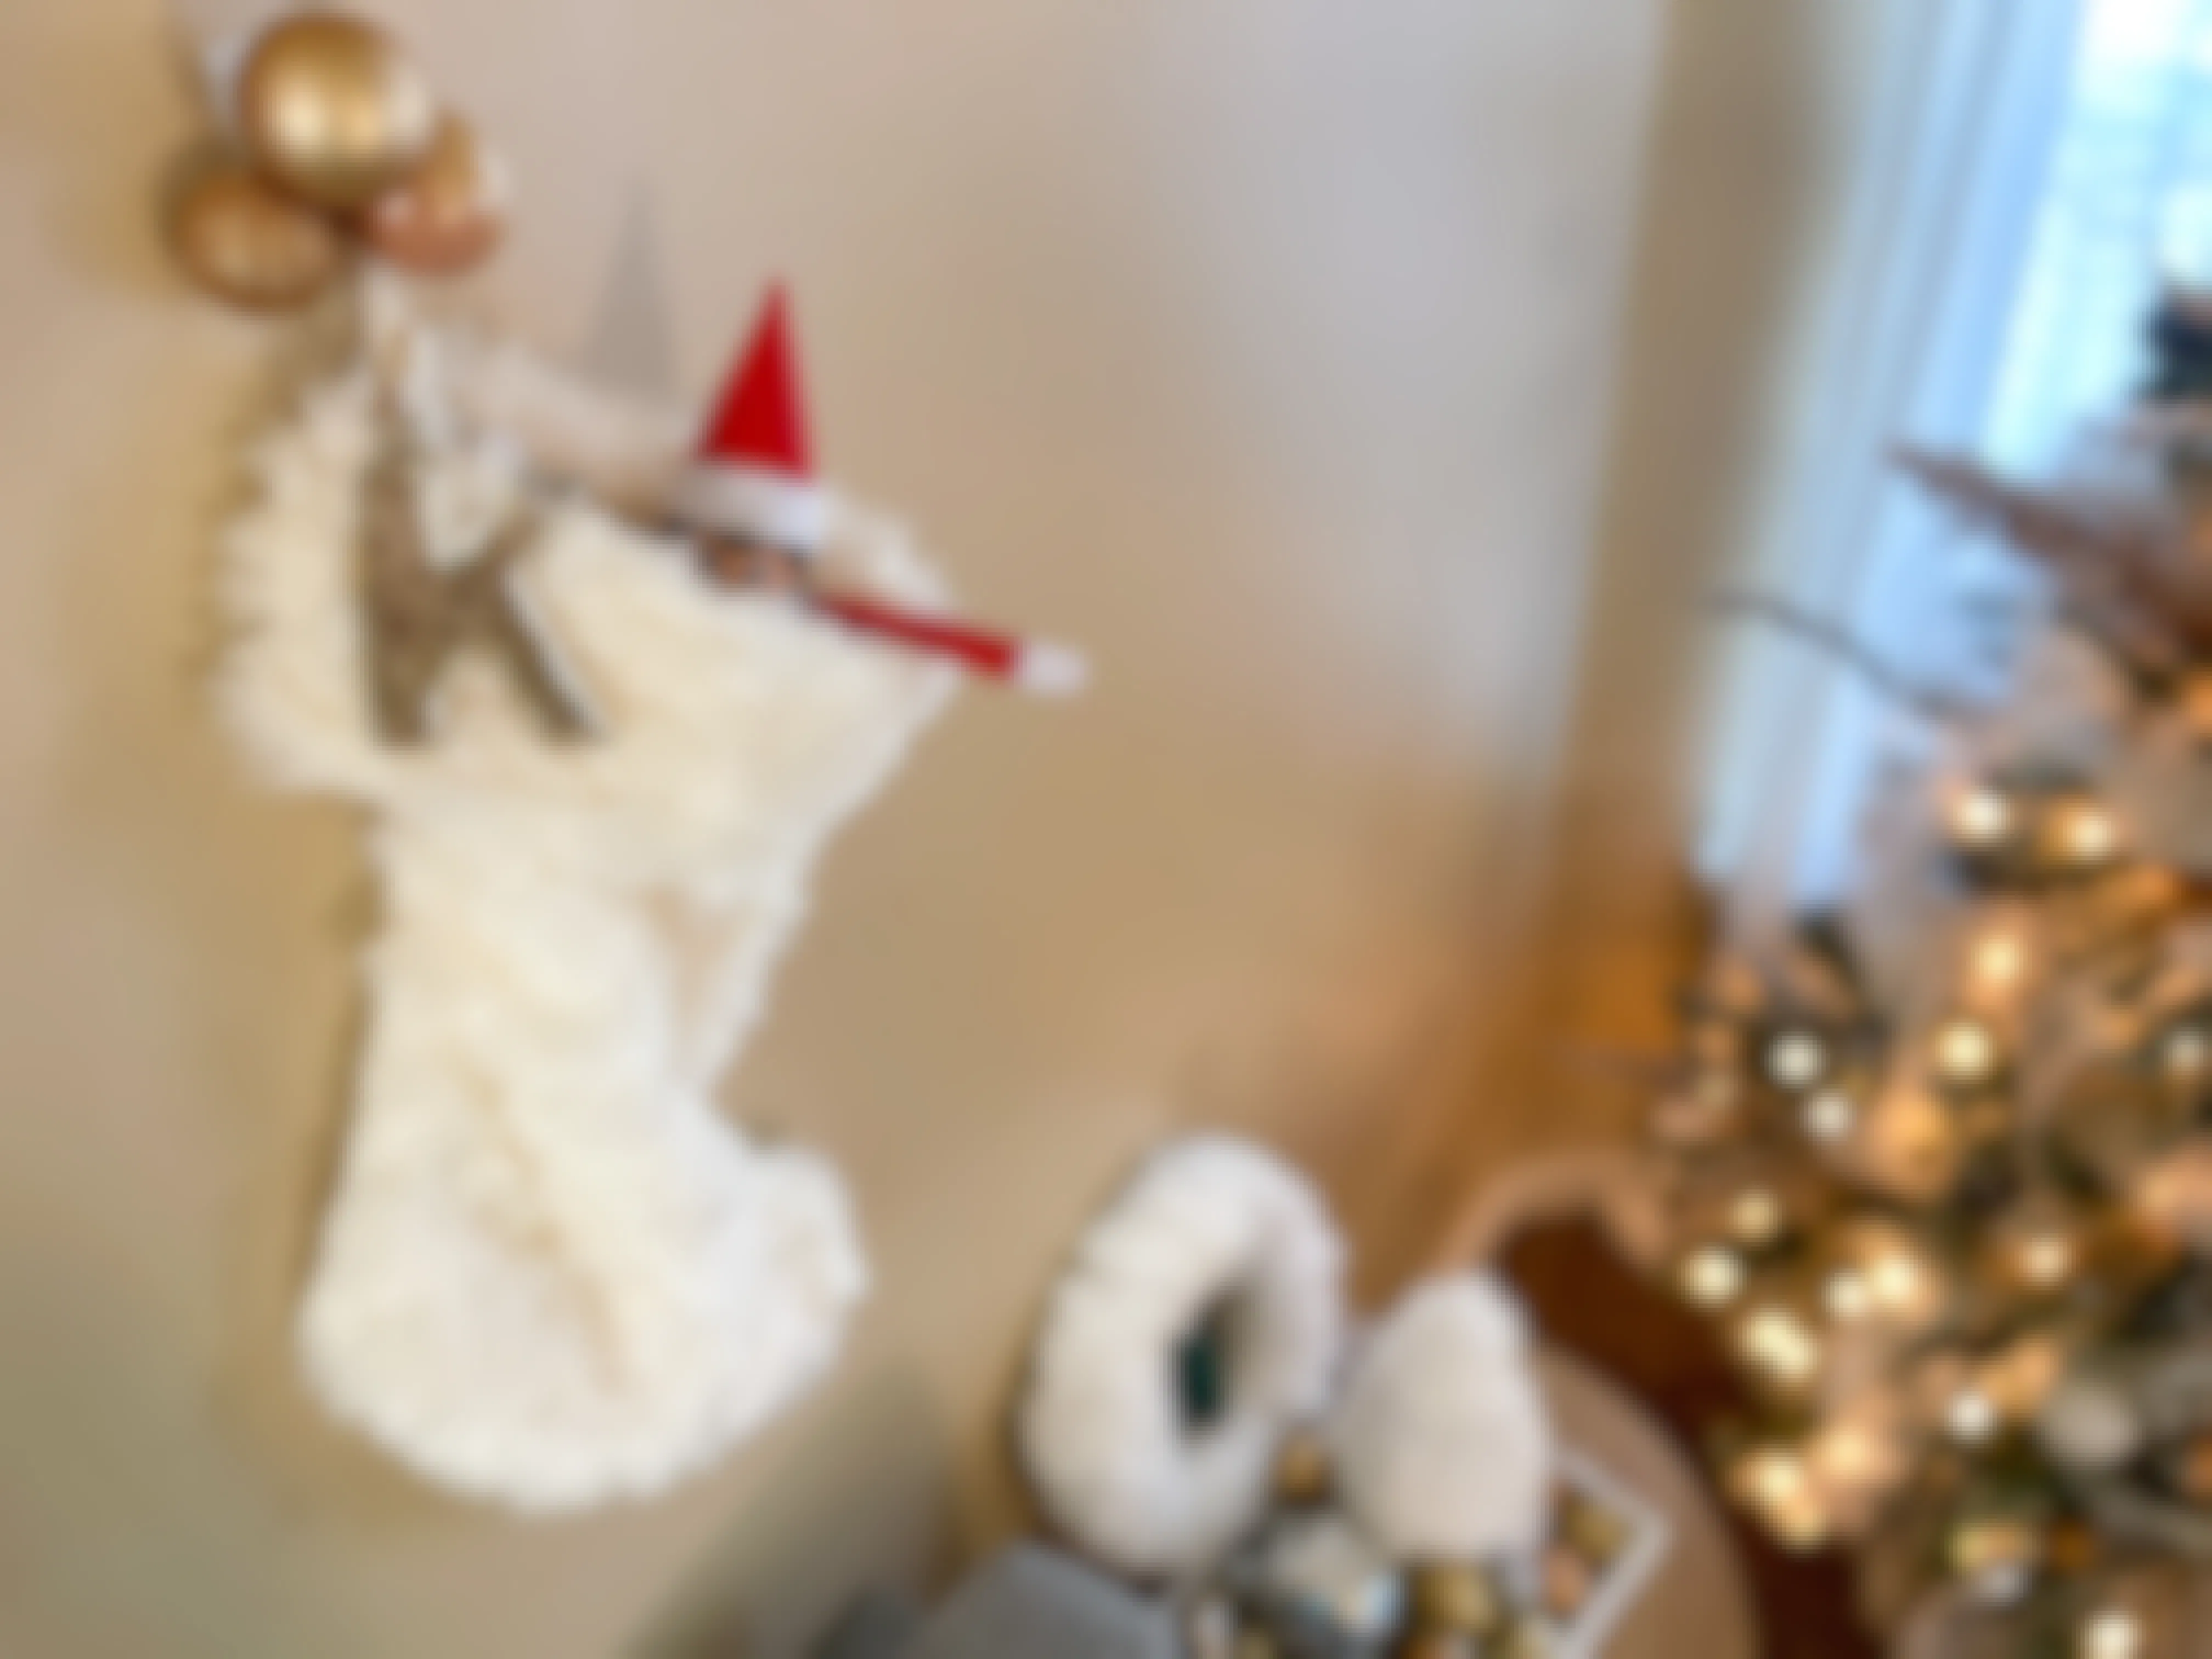 elf on the shelf doll hiding in a stocking 